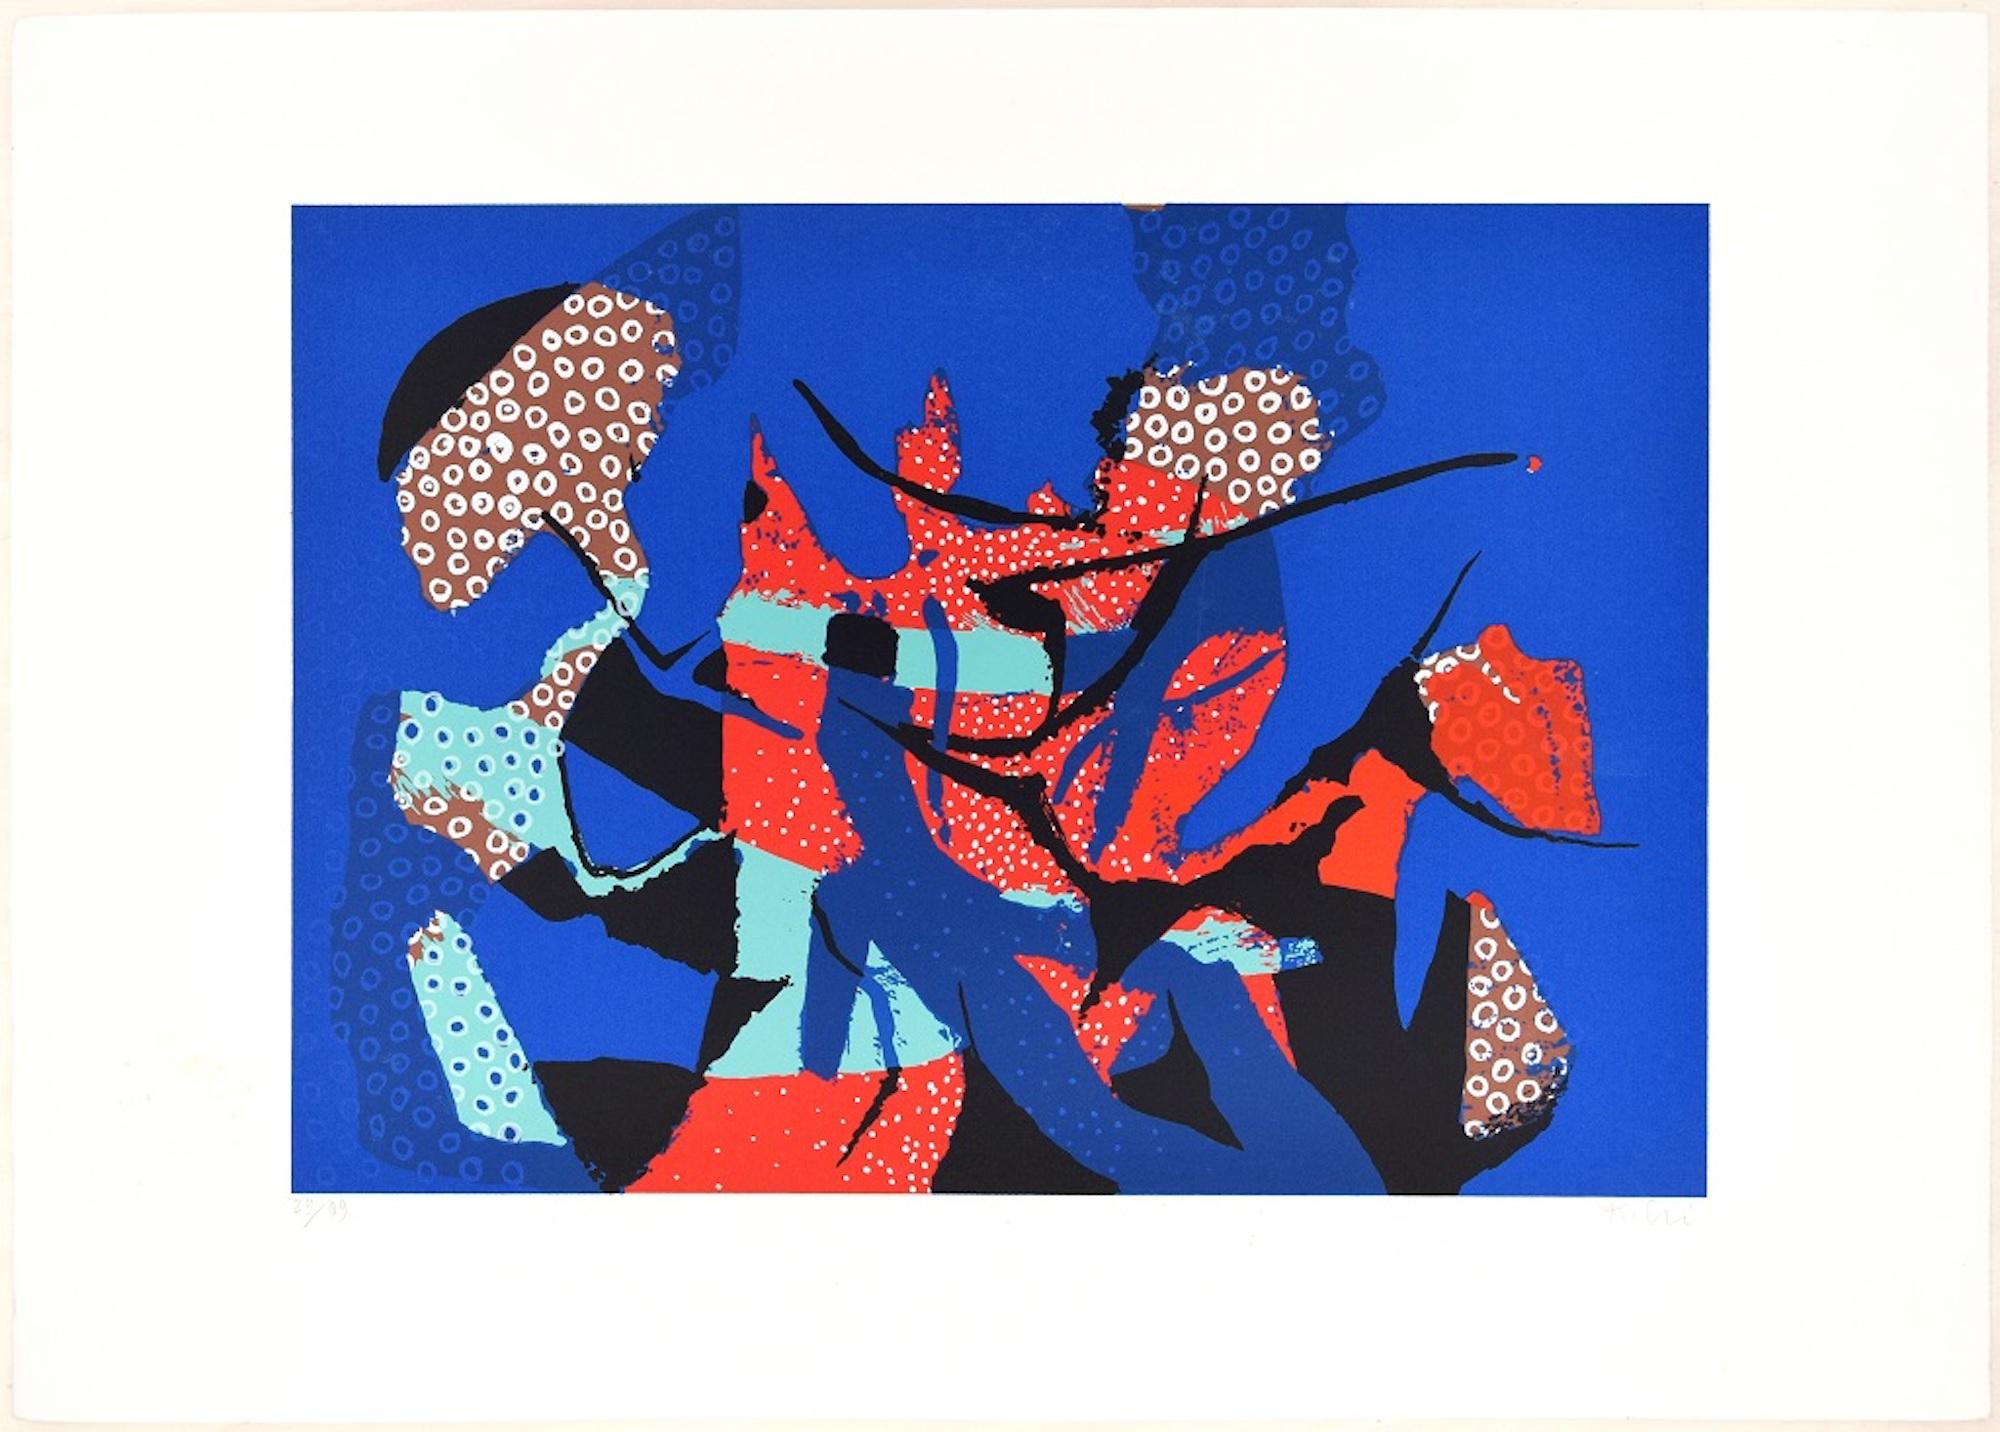 Image dimensions: 35x50 cm.

Blue composition is a colored serigraph on Fabriano watermarked paper, realized in the Seventies of XX century by the Italian artist, Wladimiro Tulli, published by La Nuova Foglio, a publishing house of